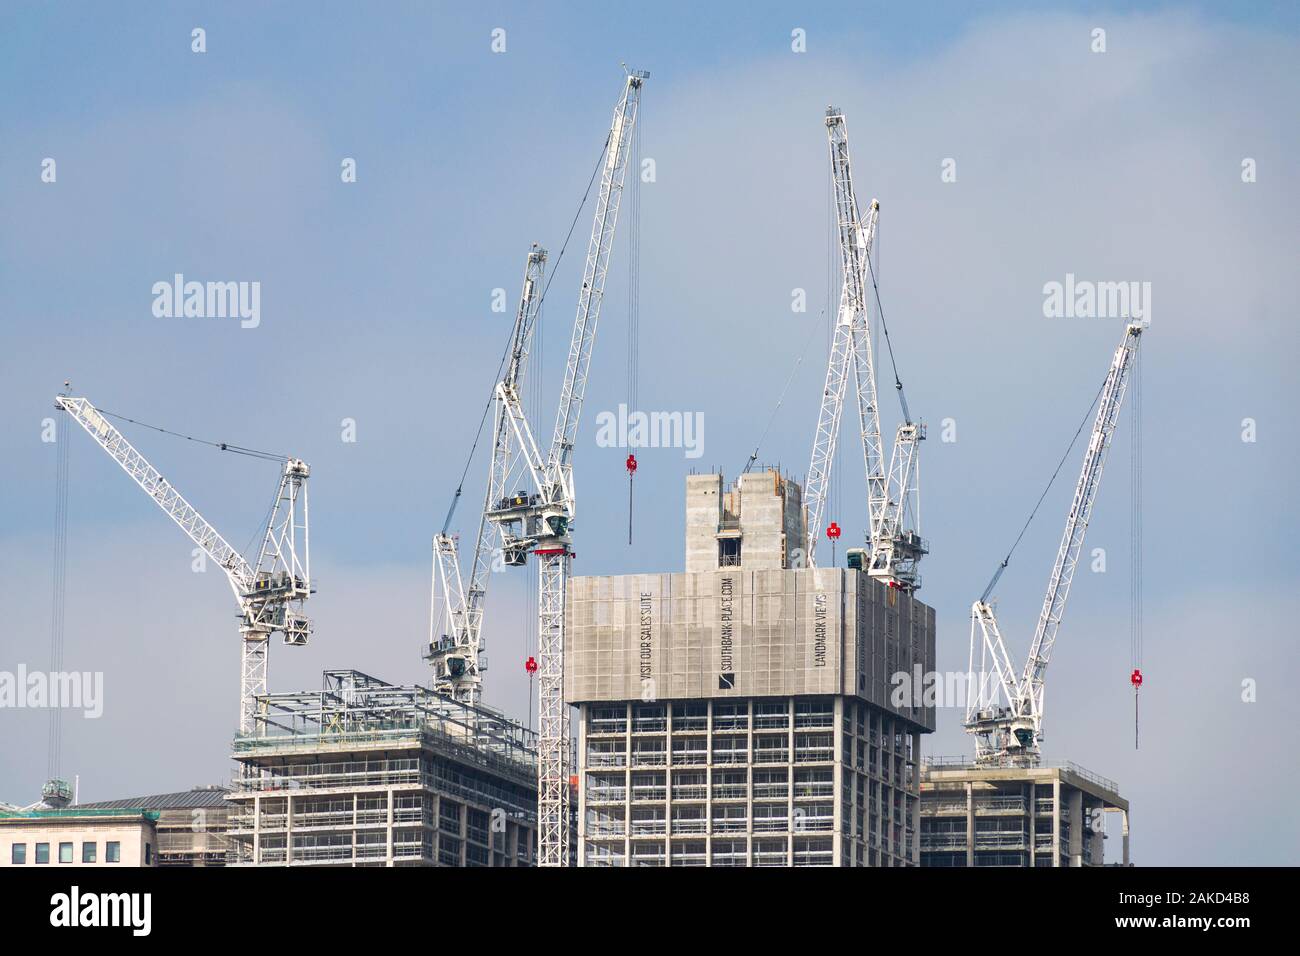 Construction of the Southbank Place office, residence and retail buildings with cranes on roof, London, UK Stock Photo